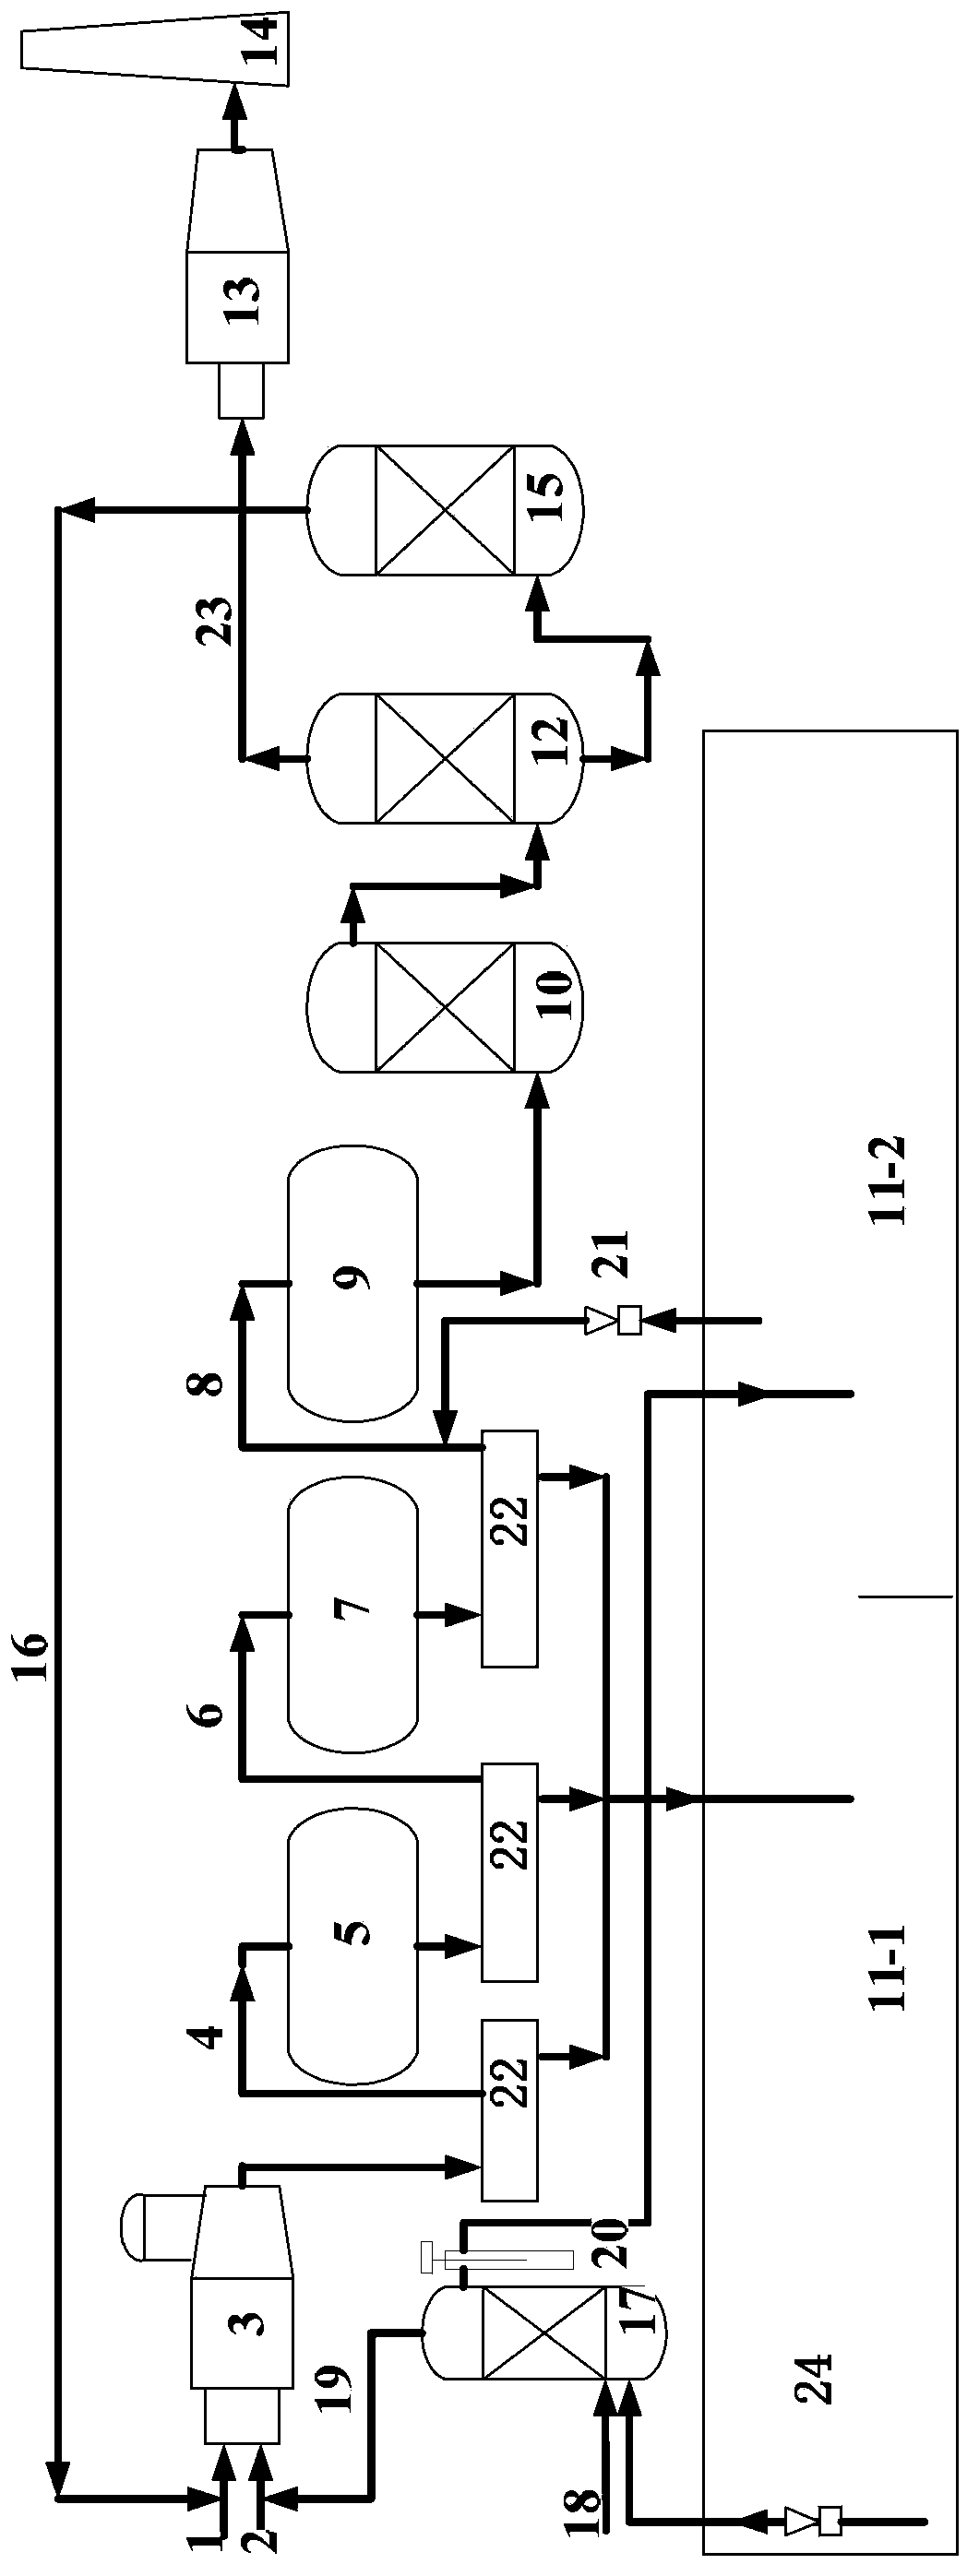 Treatment method for liquid sulfur degassing in sulfur recovery process